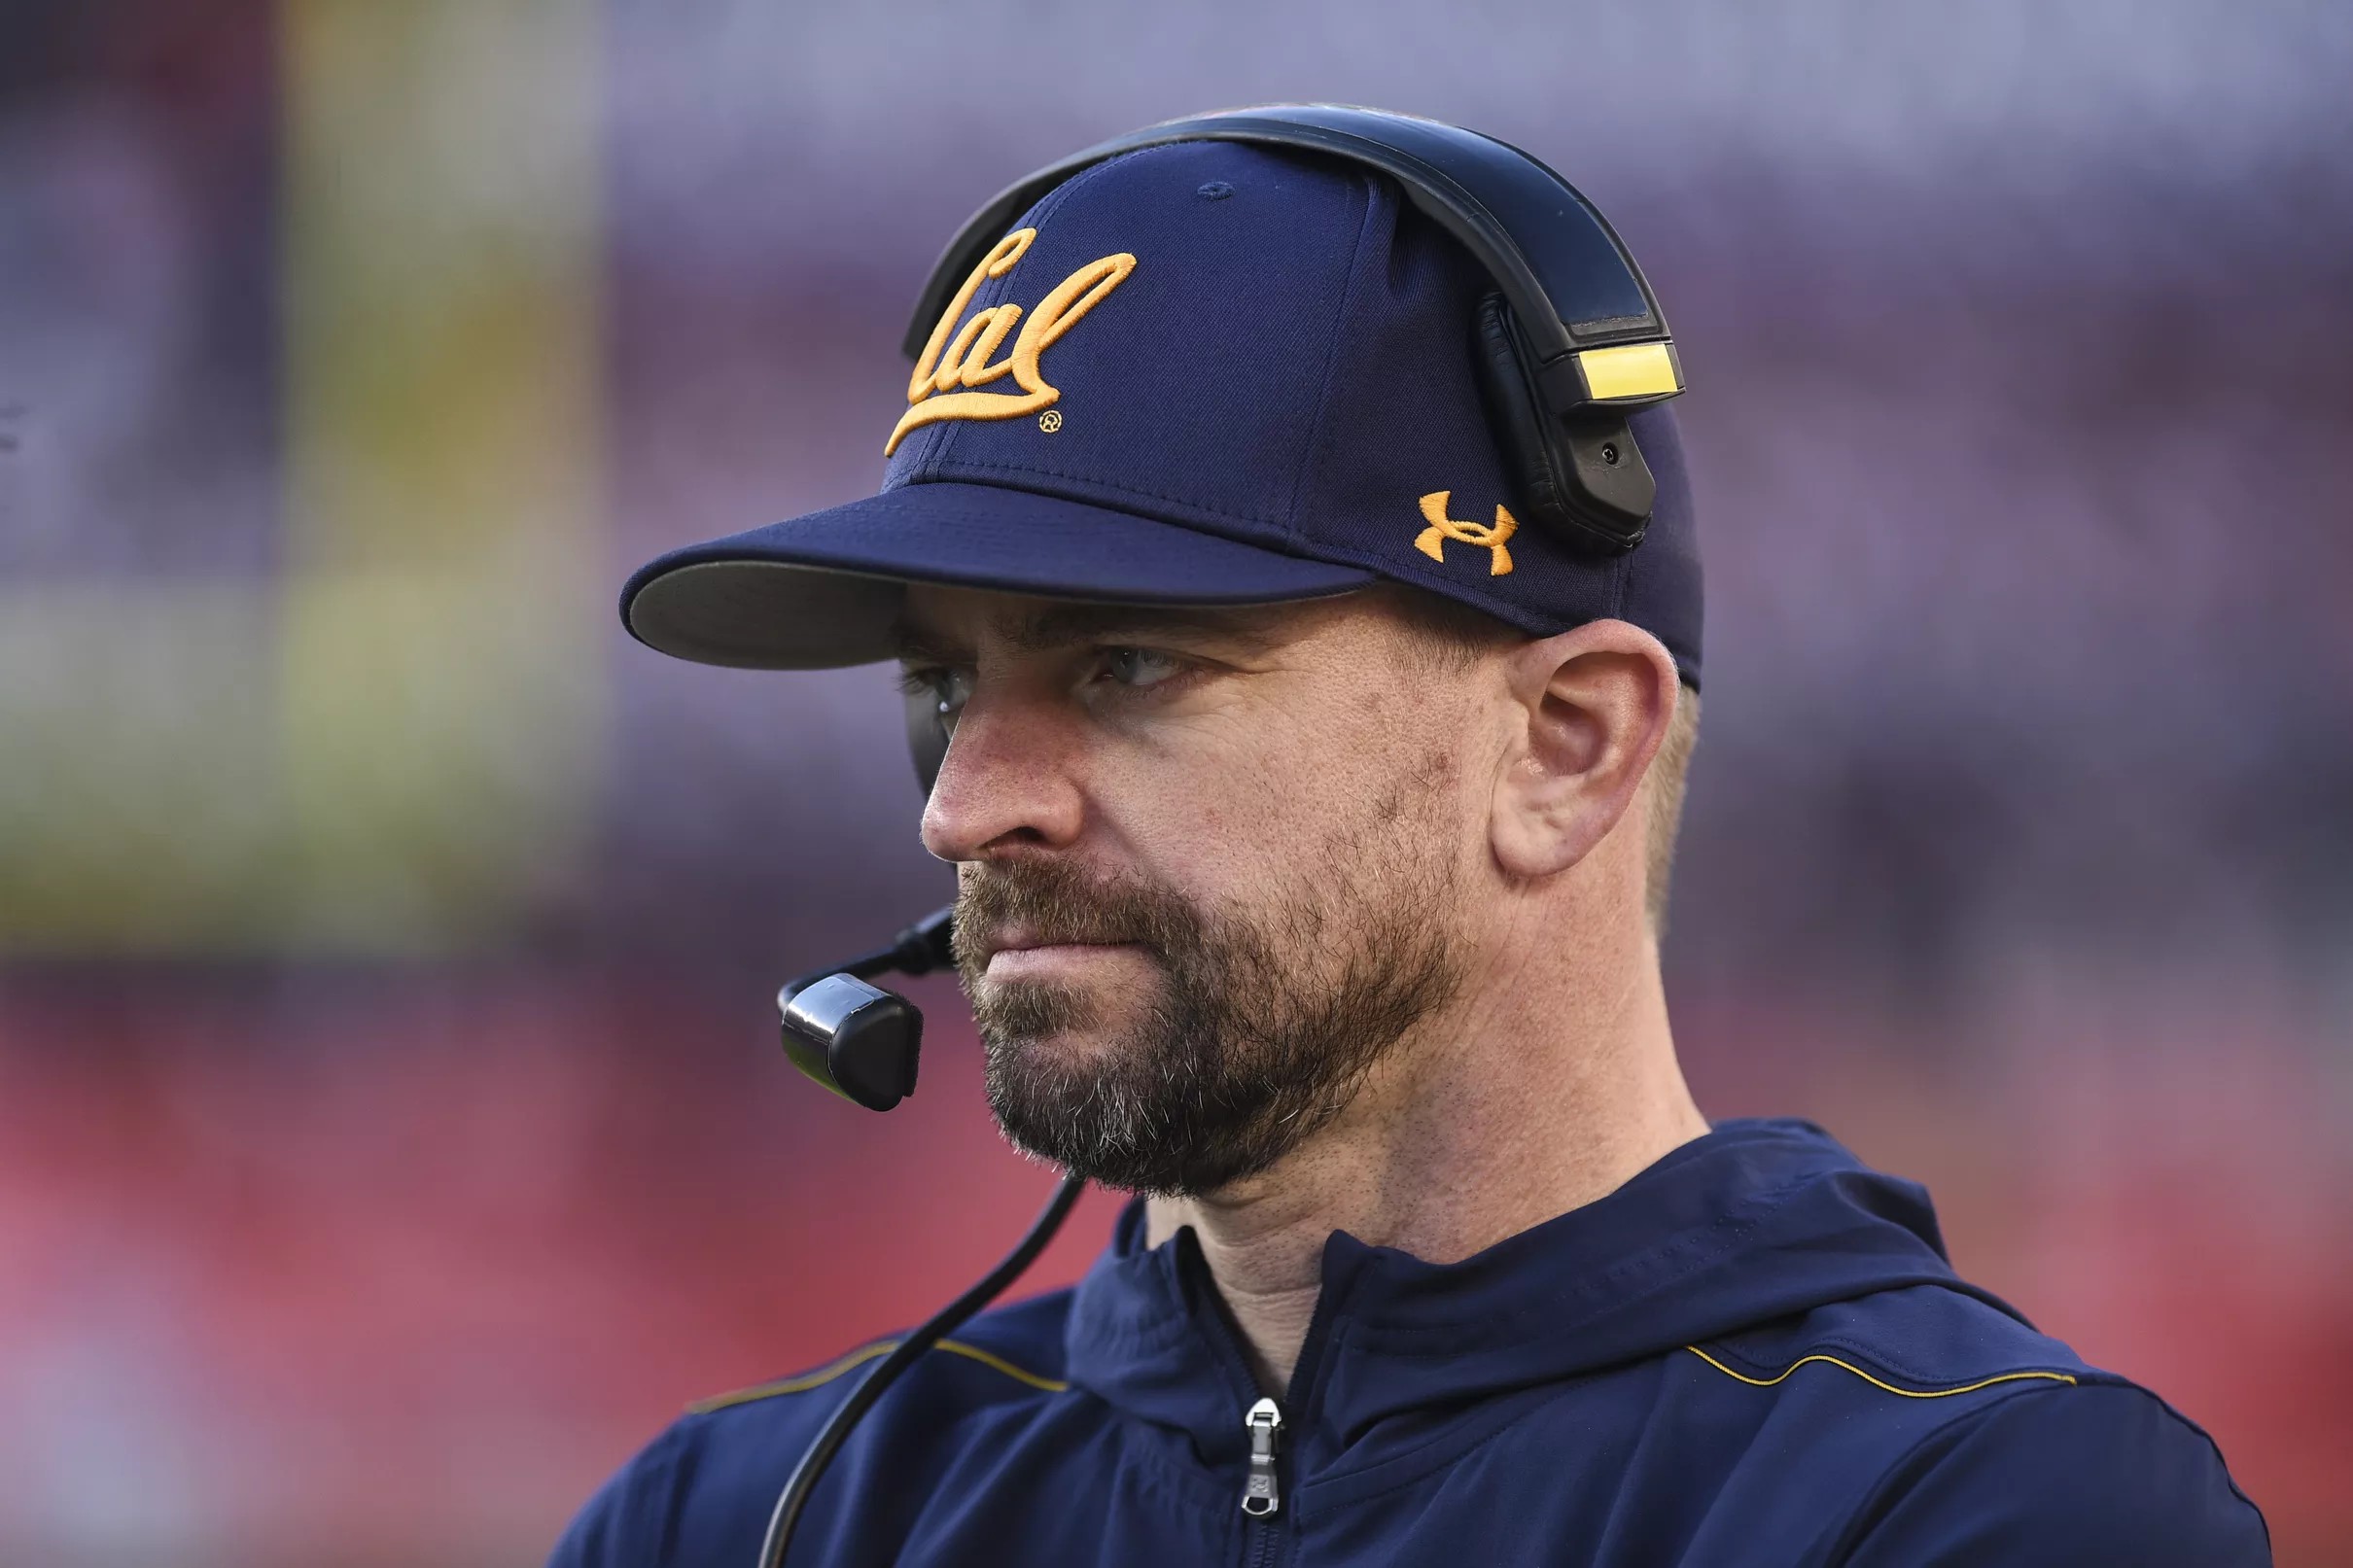 Cal’s 2020 (revised, again) football schedule